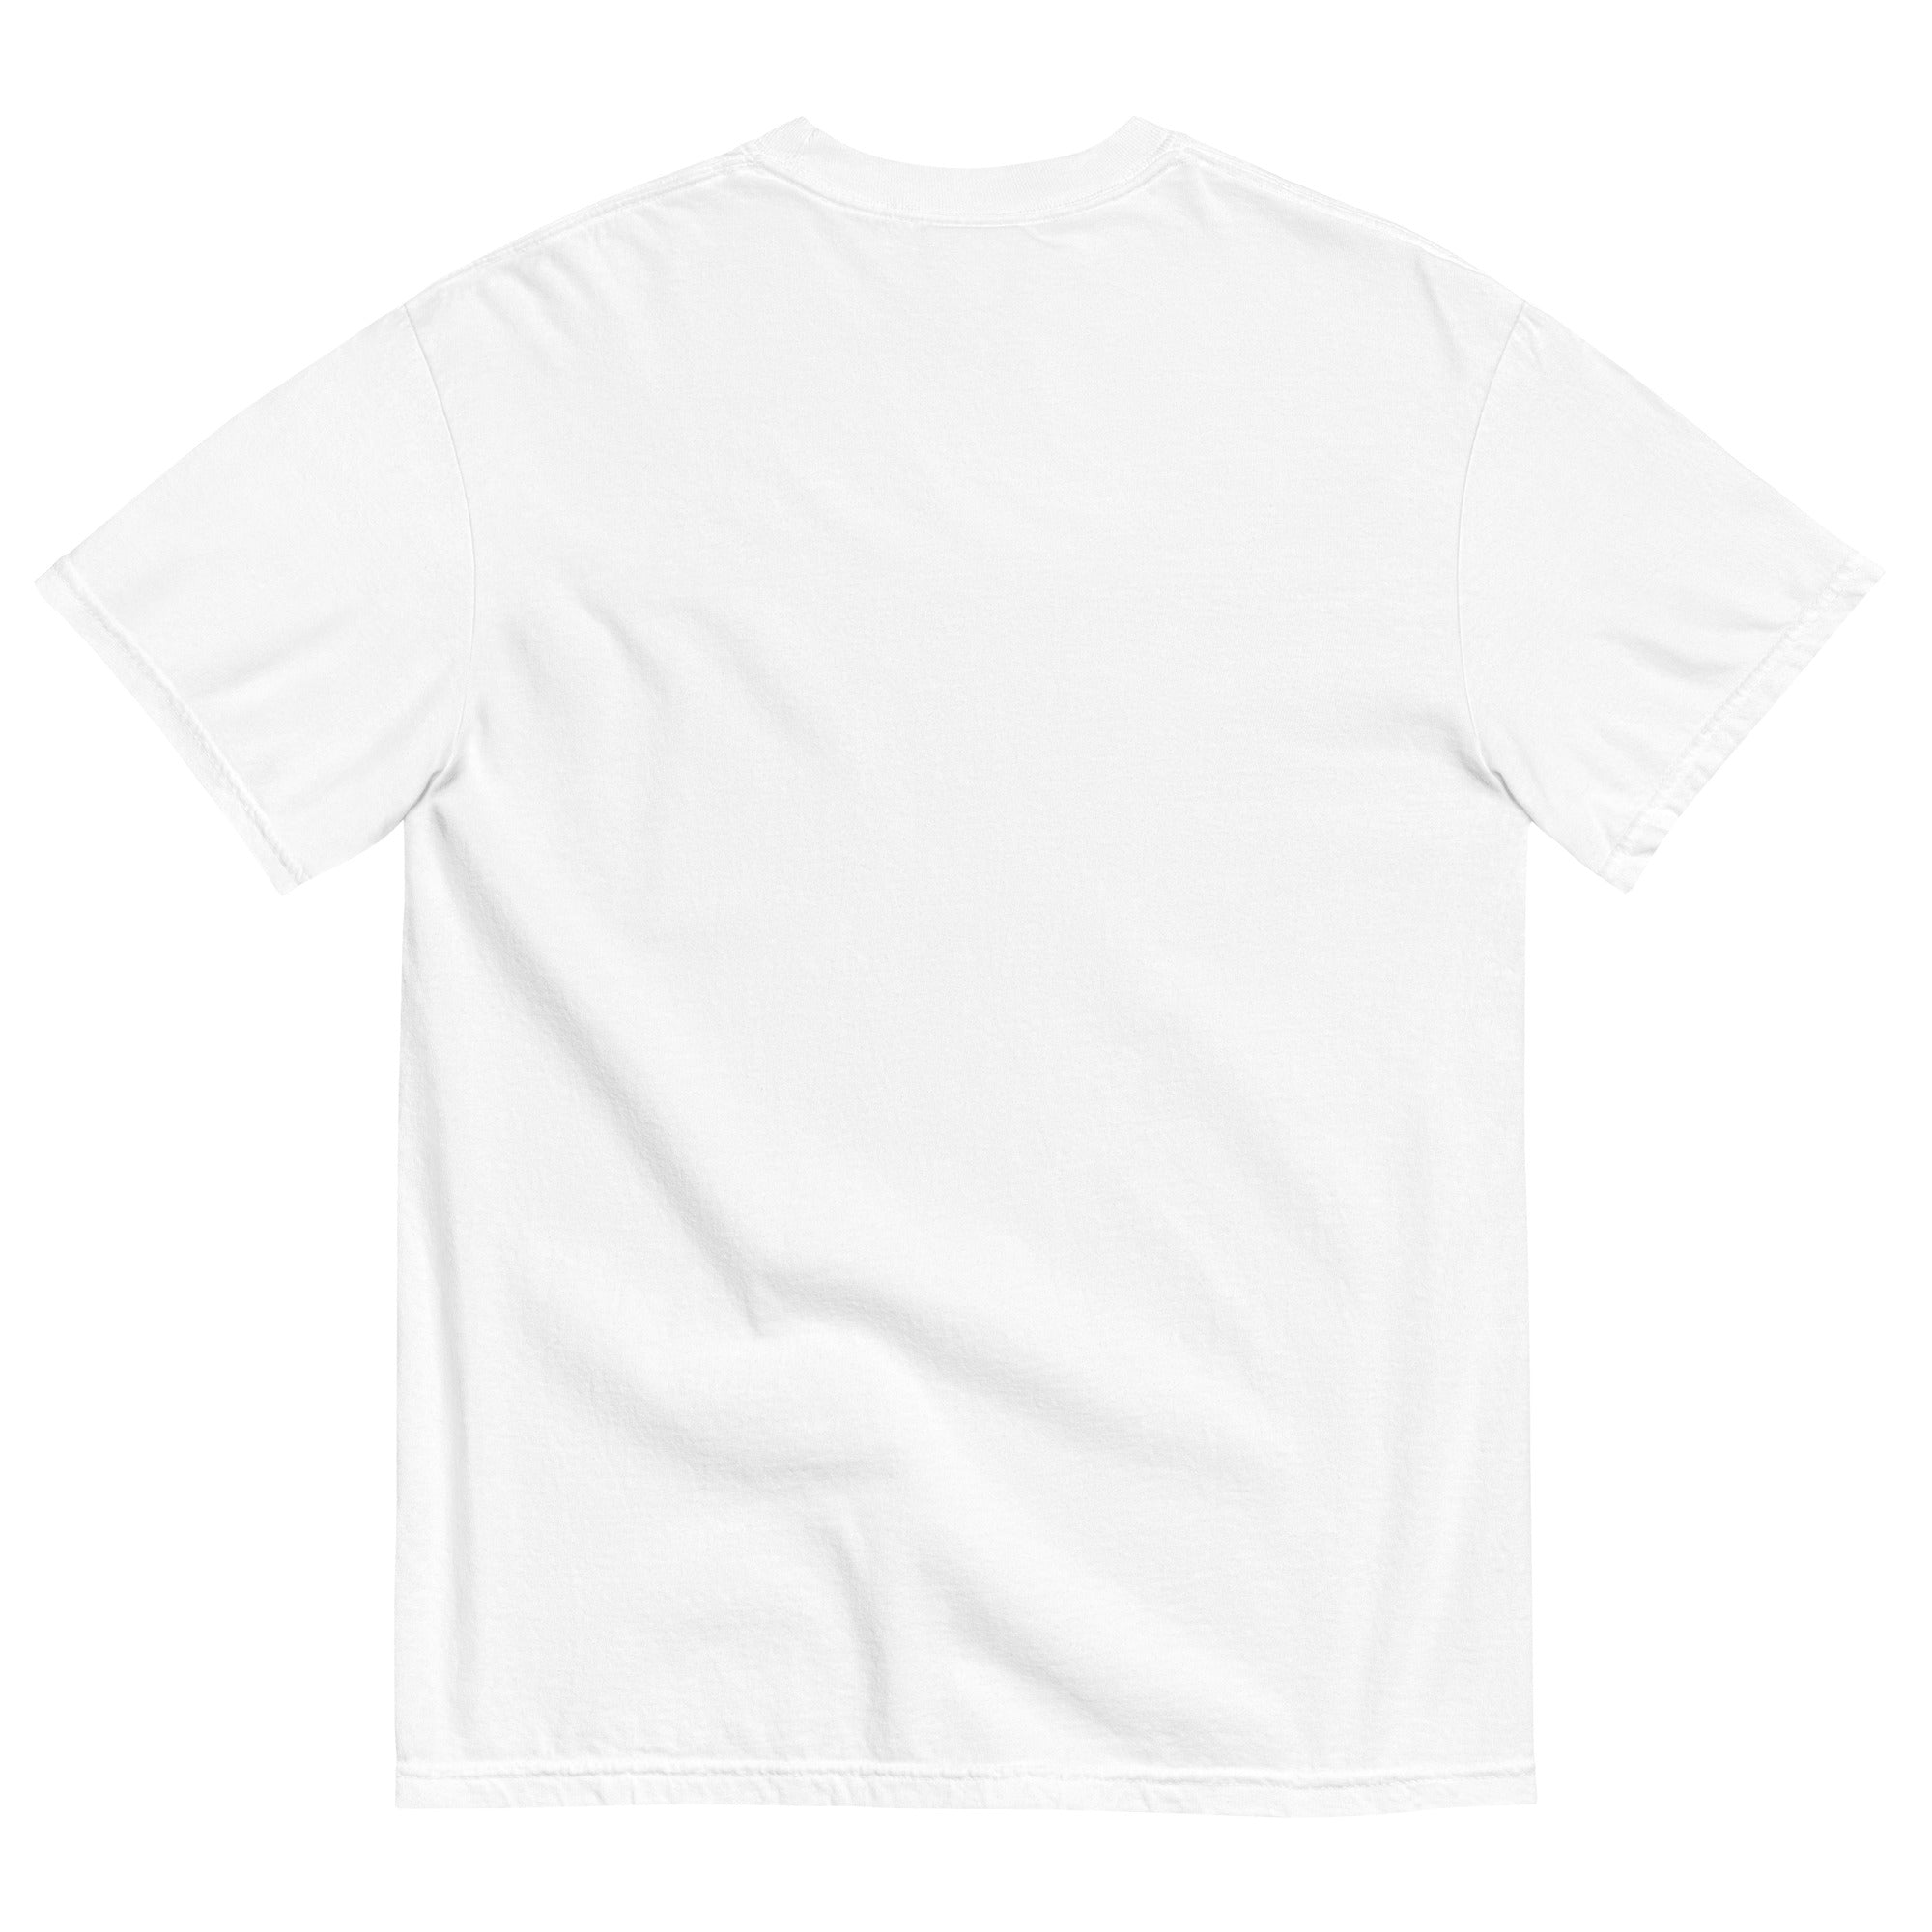 Pride Relaxed Fit T-Shirt - Castro | San Francisco, CA